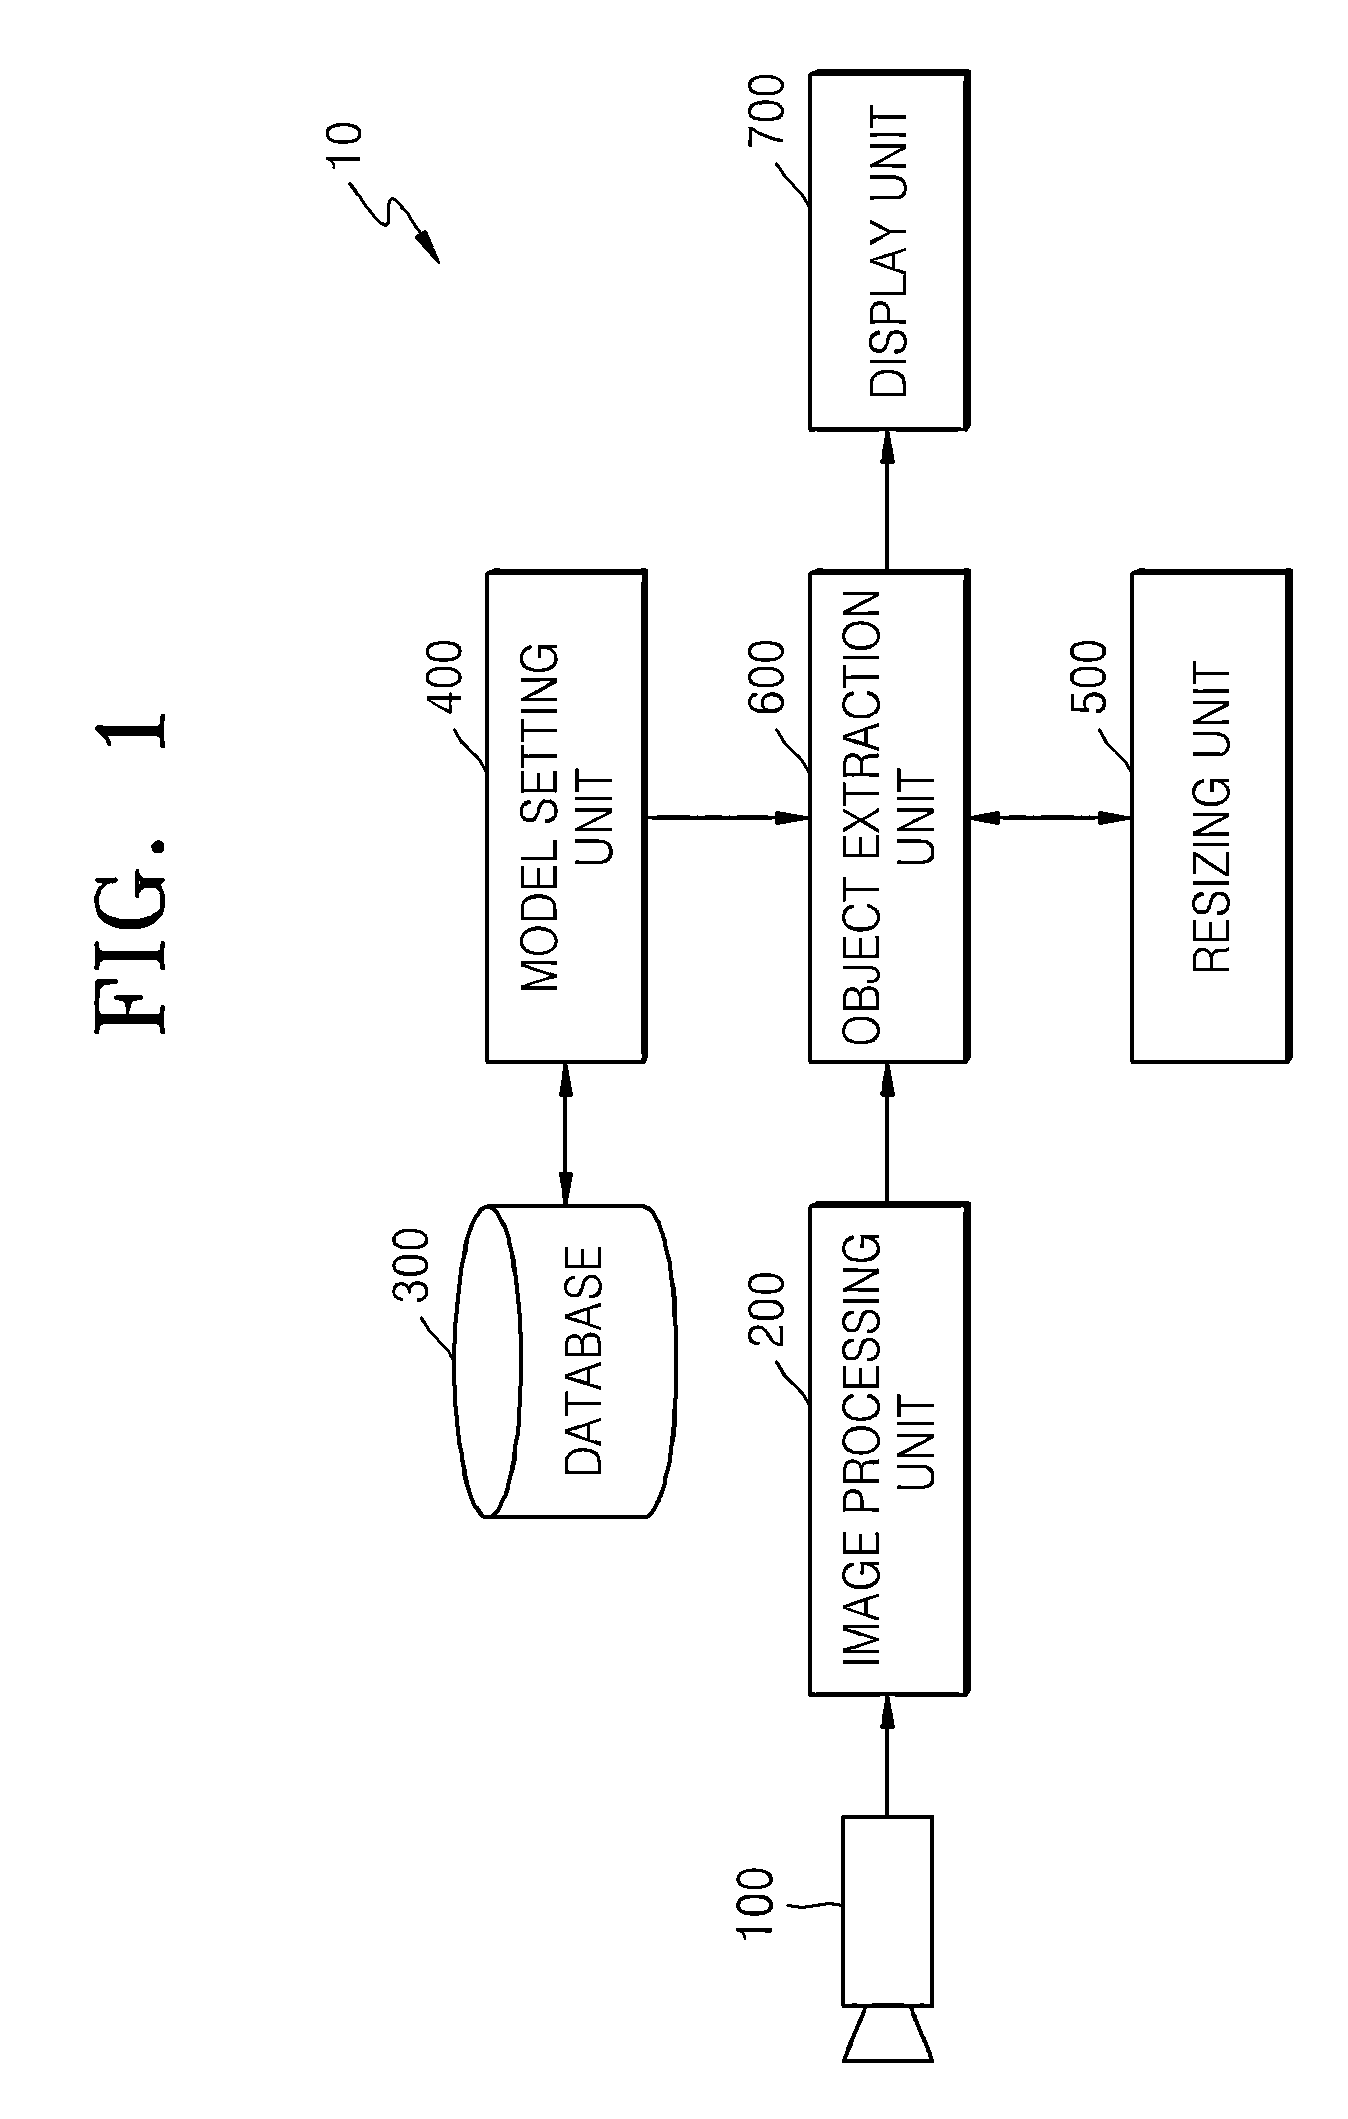 Apparatus and method for extracting object